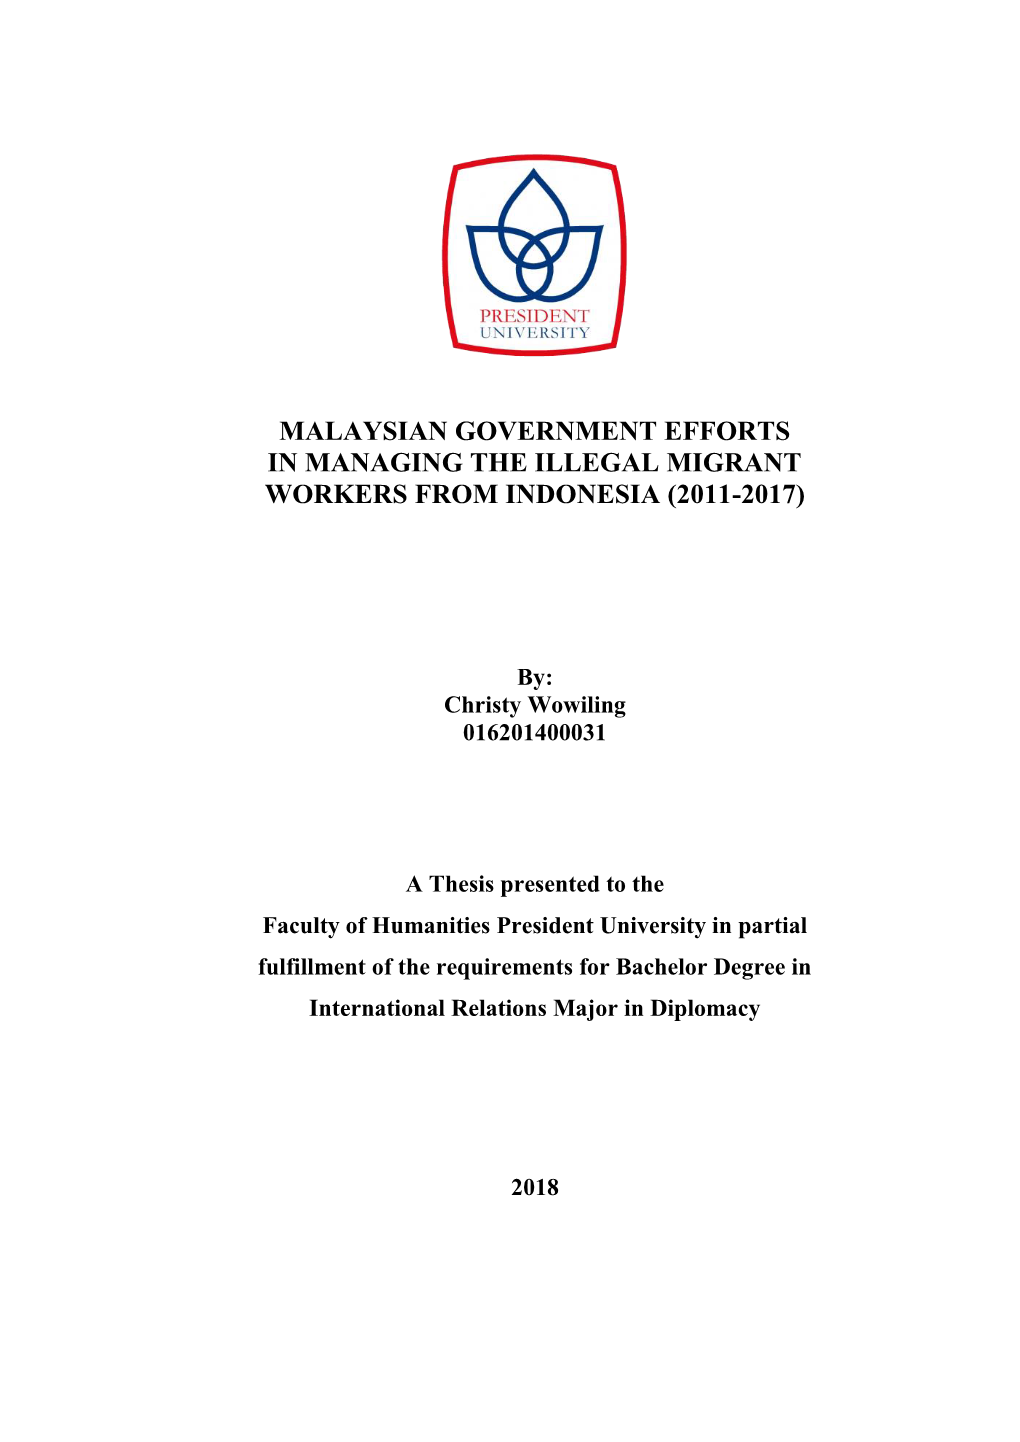 Malaysian Government Efforts in Managing the Illegal Migrant Workers from Indonesia (2011-2017)